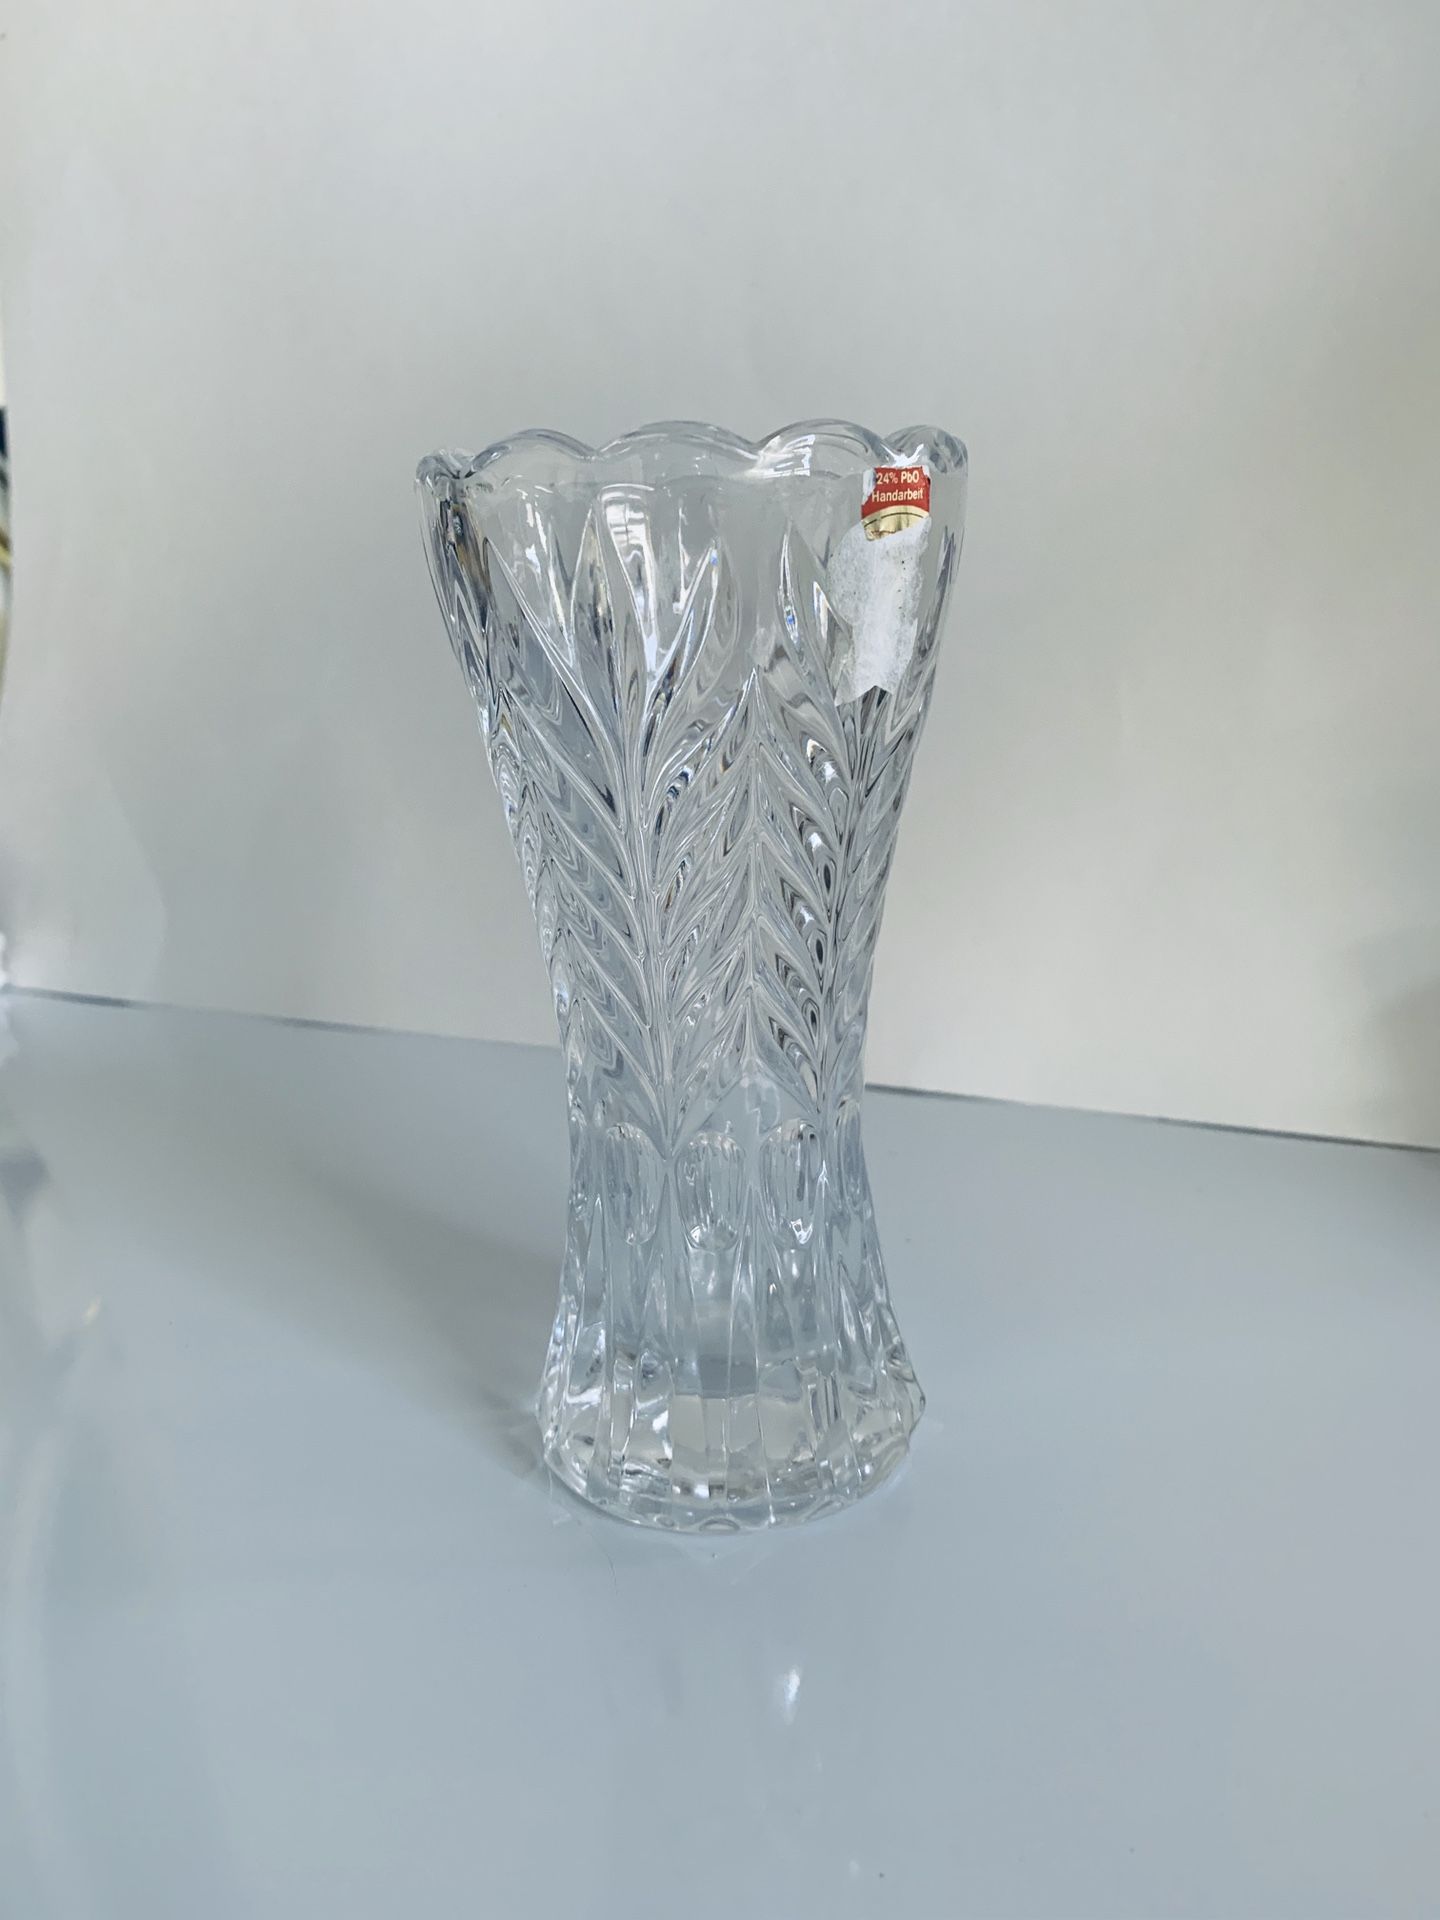 Vintage Small Heavy Crystal Flower Vase. 6” Toll 4” Wide From Left To Right.